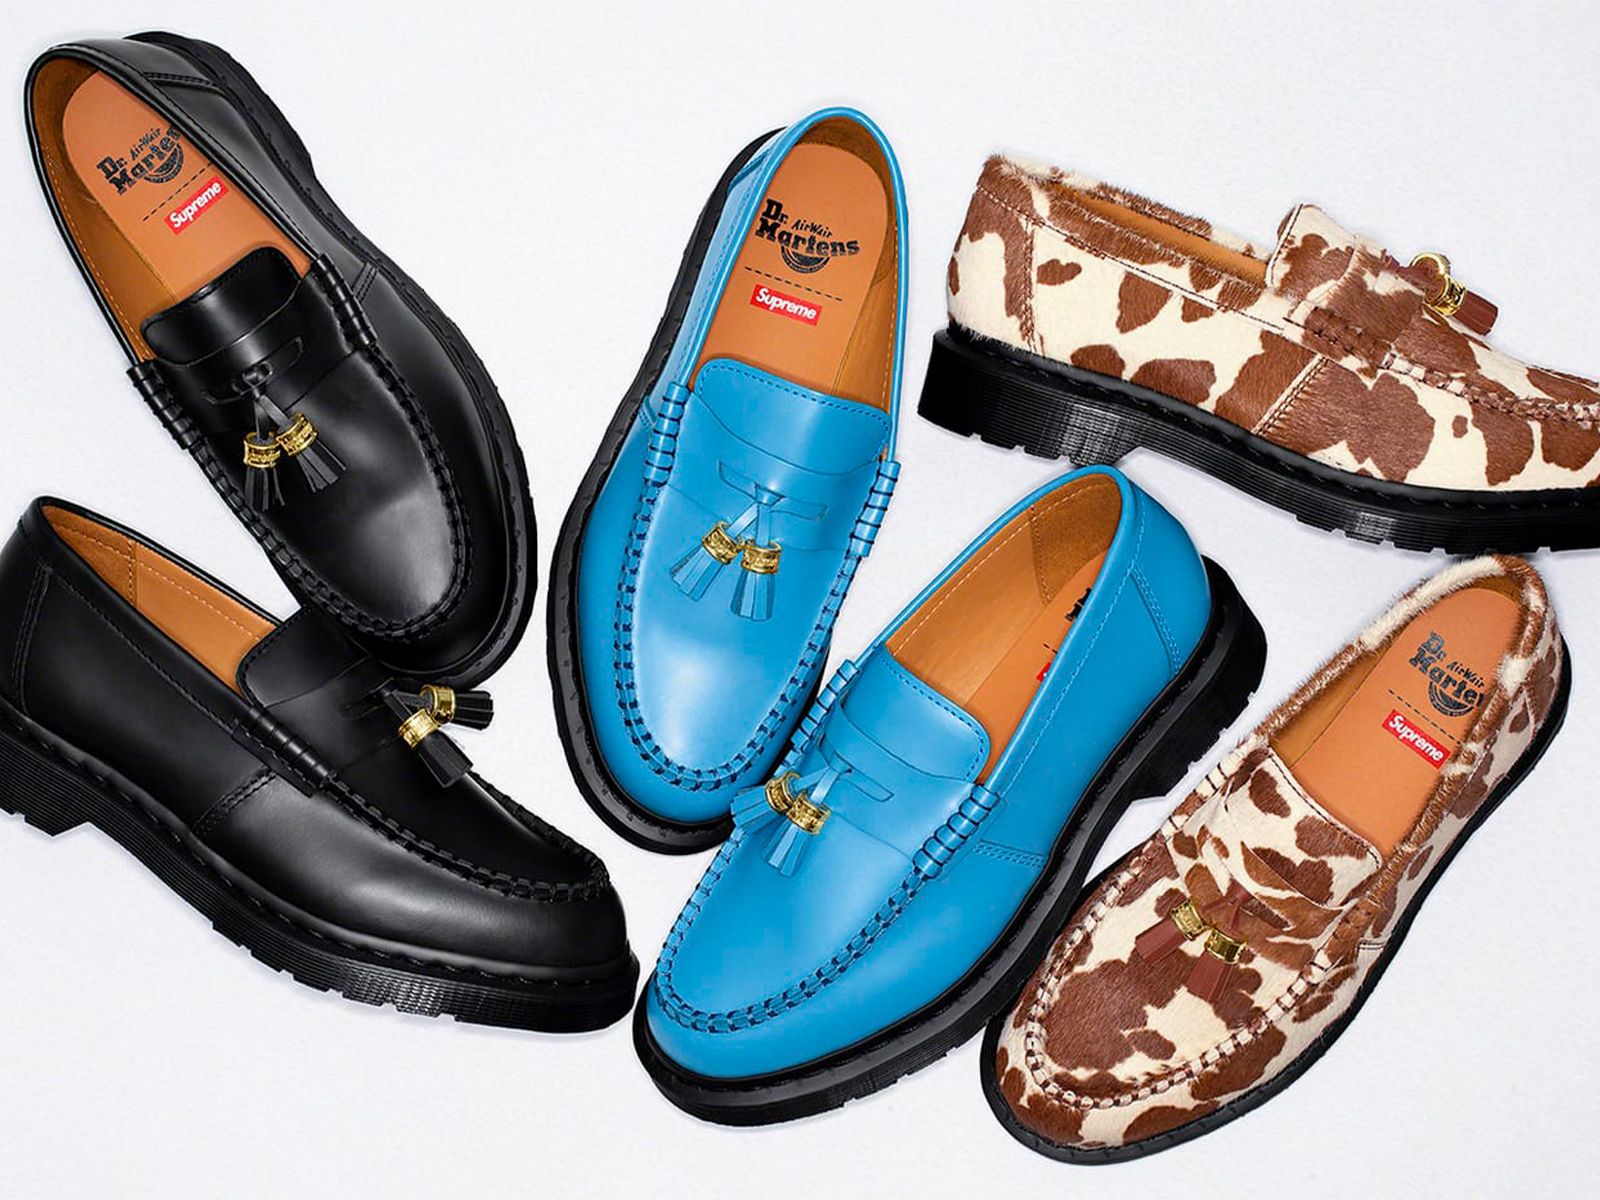 Supreme and Dr. Martens merge this season in three pairs of loafers